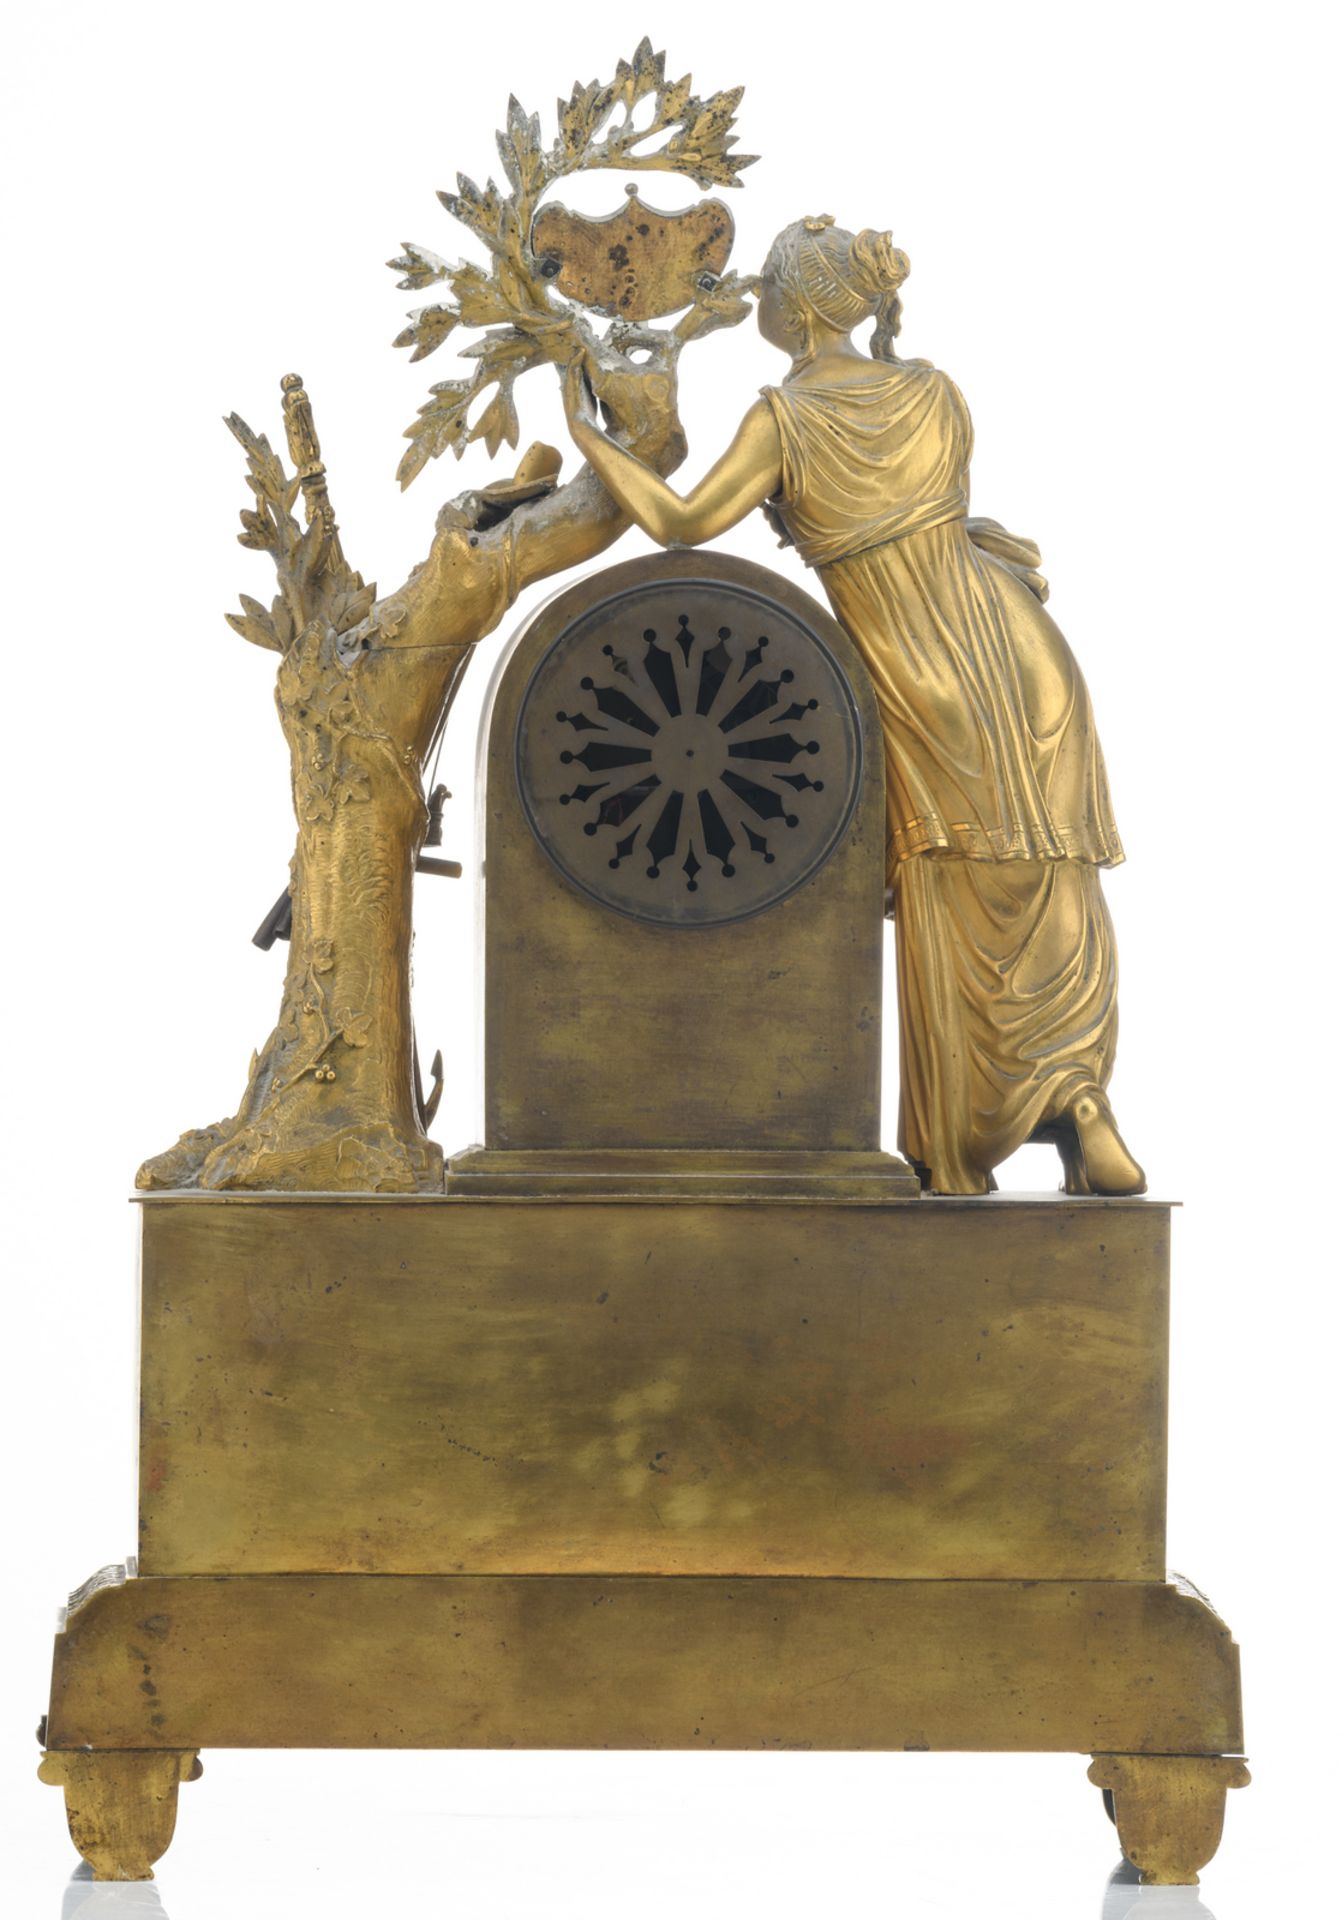 A mid 19thC gilt bronze mantle clock depicting Helen of Troy, traces of a mark on the dial, H 59,5 - Bild 2 aus 3